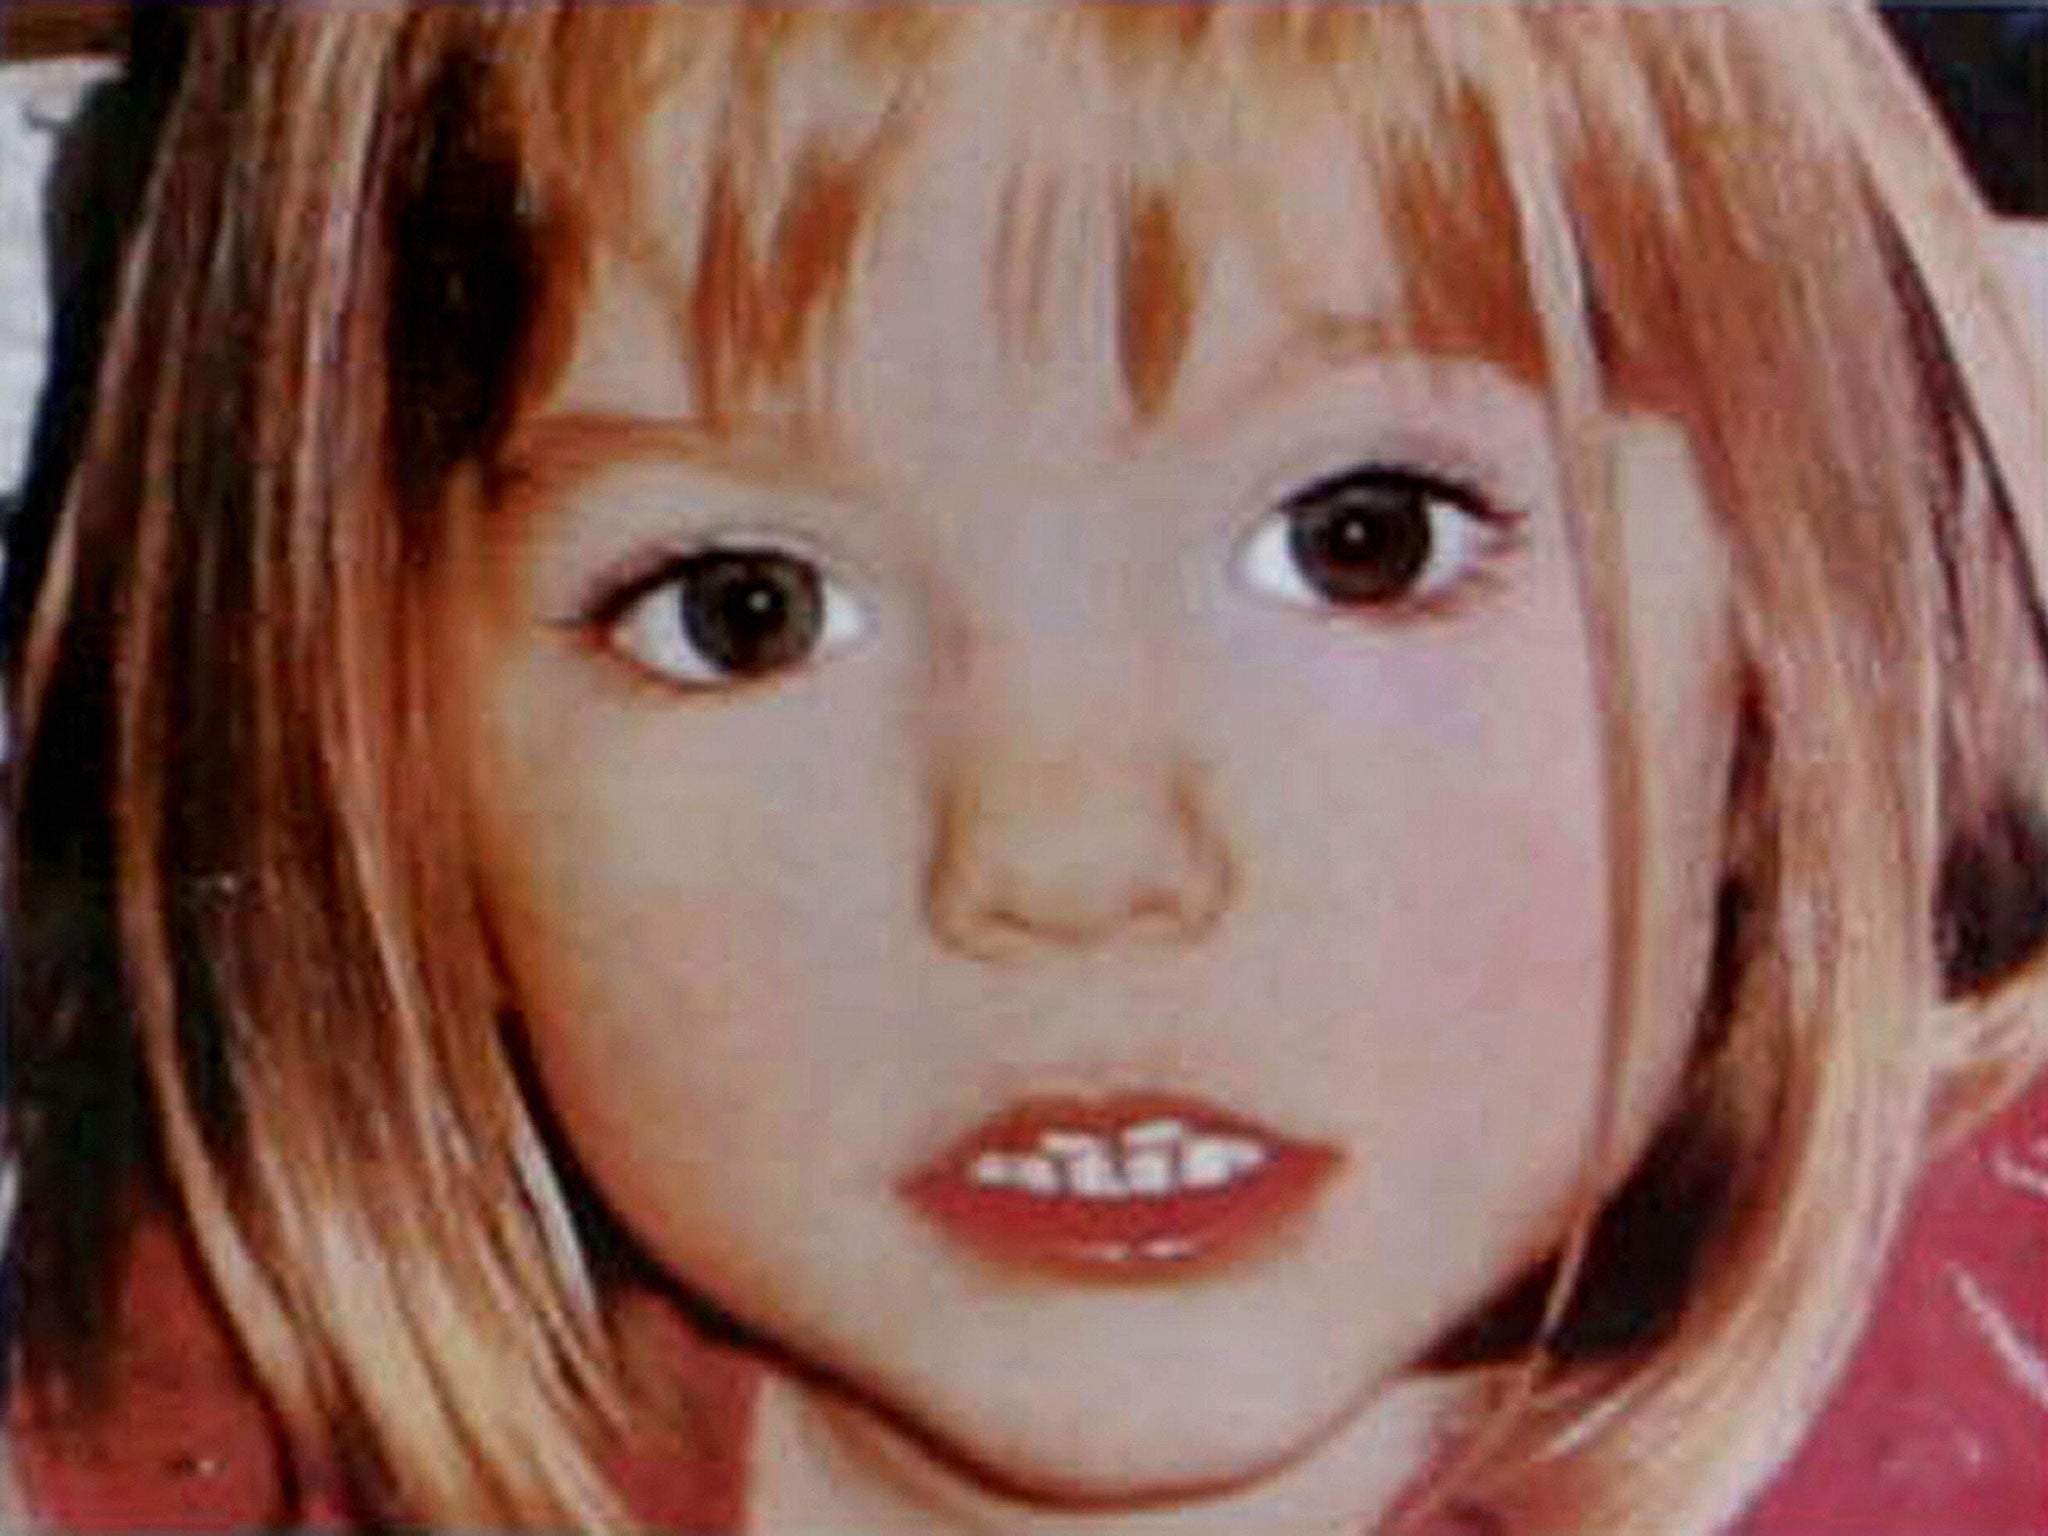 Madeleine McCann was three years old when she disappeared from an apartment in southern Portugal